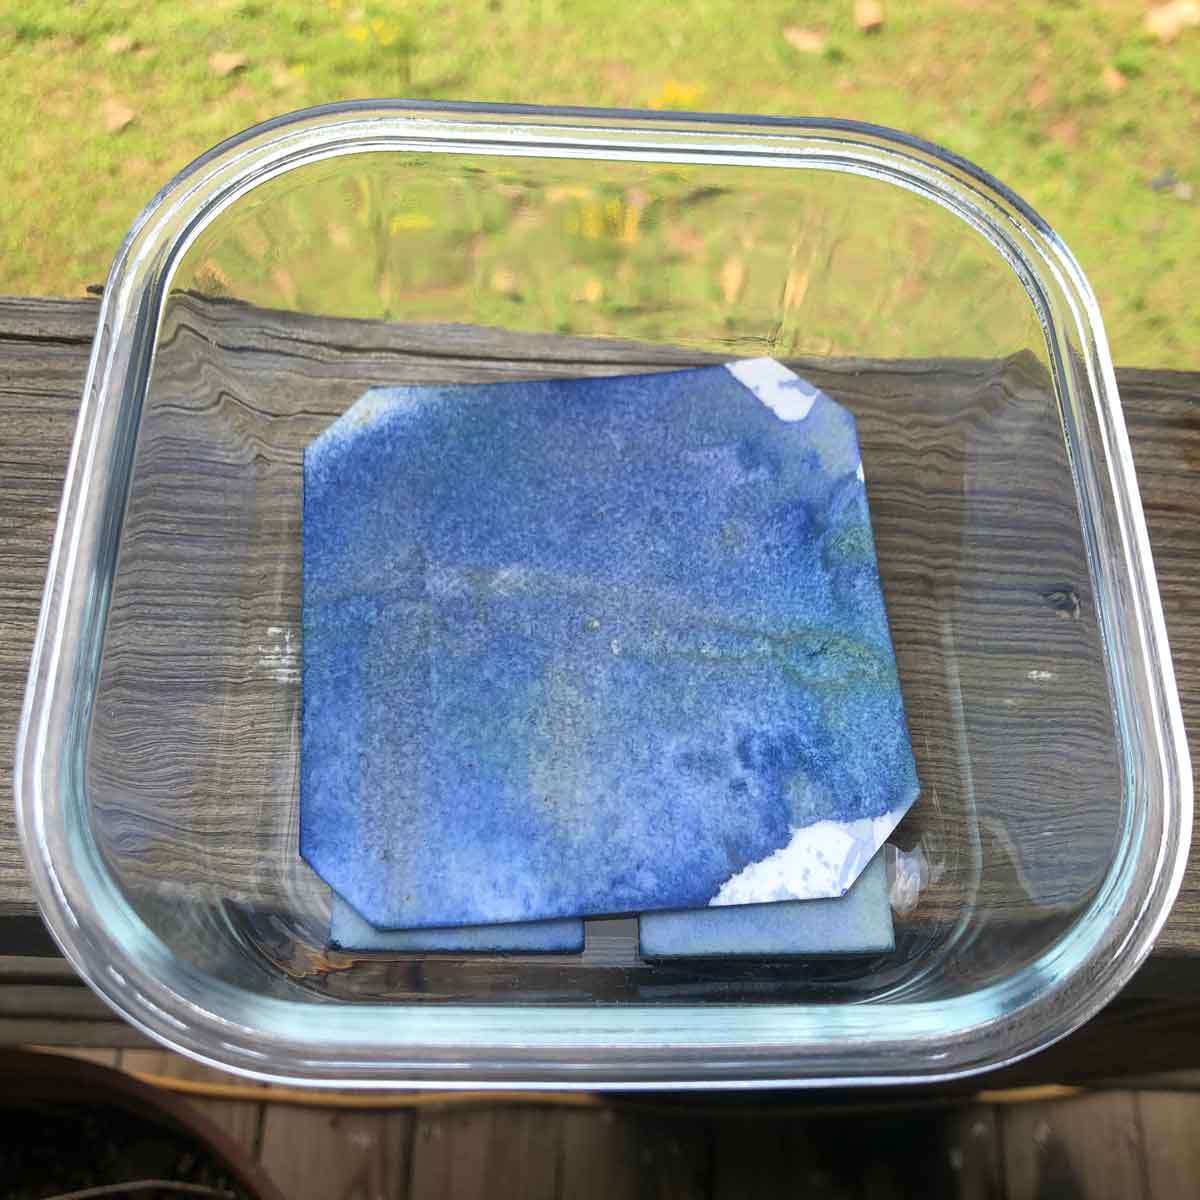 The result of one day's worth of blue pigment foraging. That's a 4" x 4" square, and it's not saturated yet.